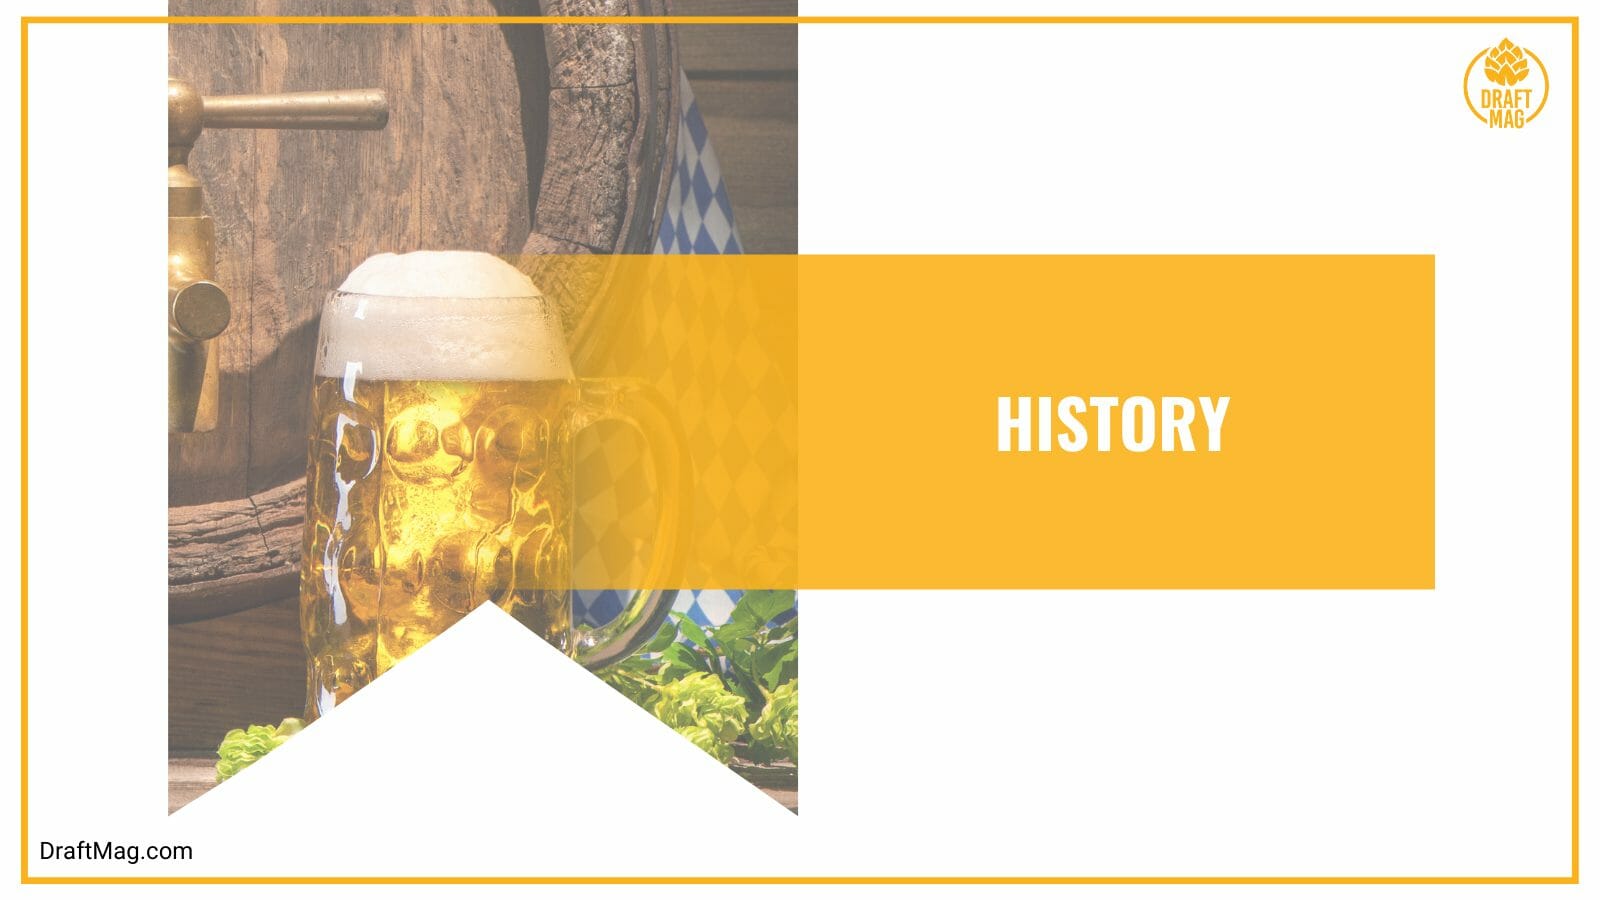 Description of the history of beer